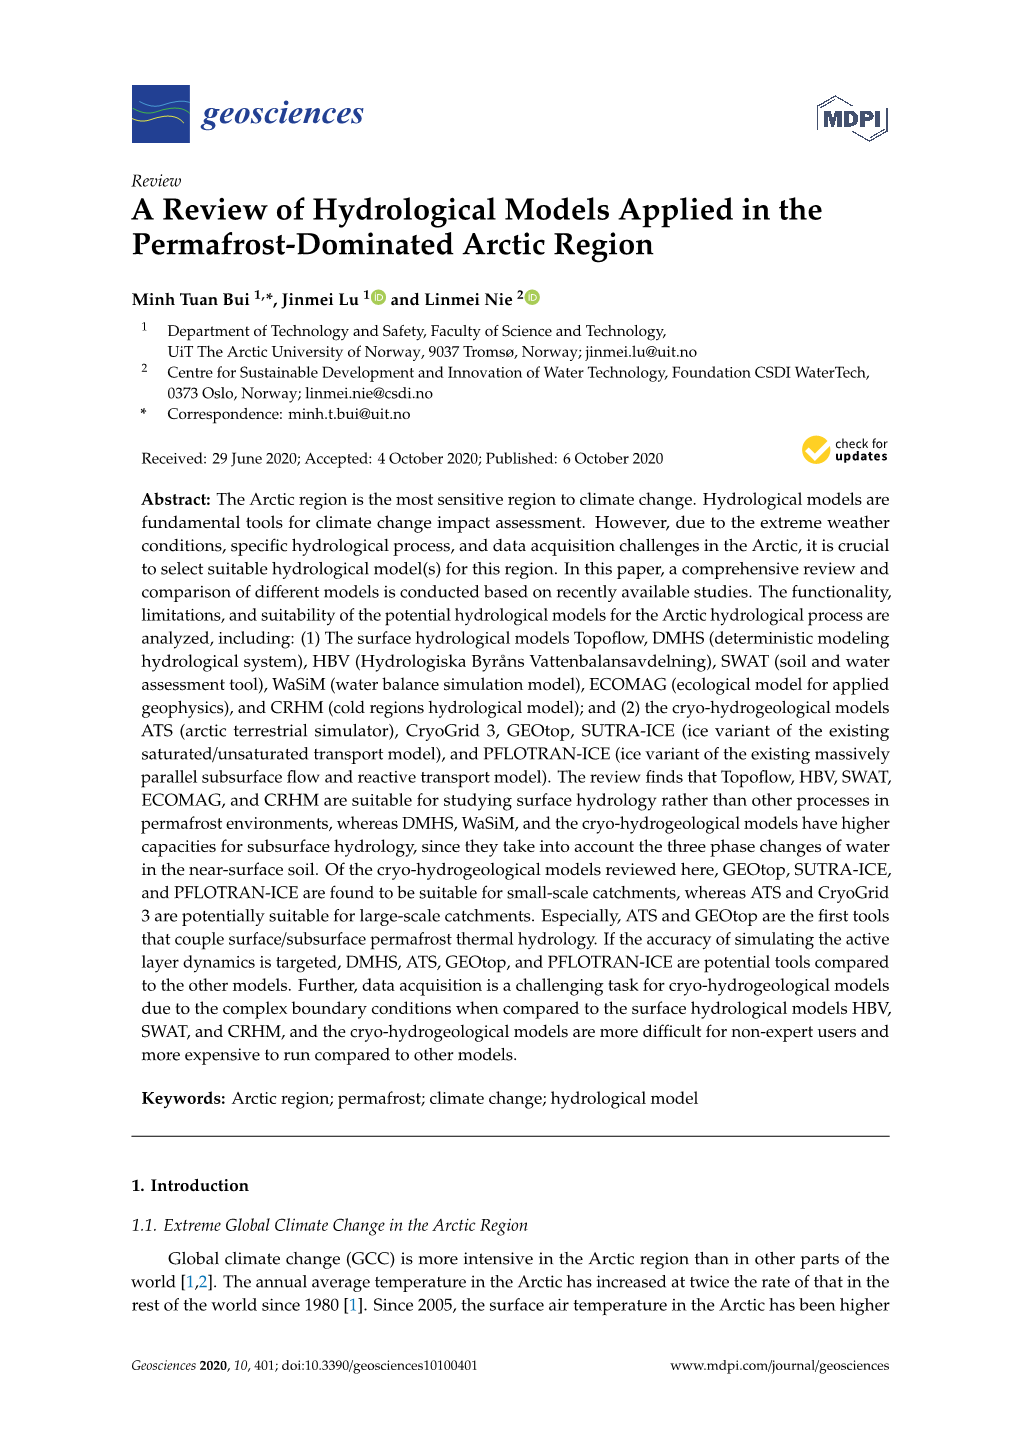 A Review of Hydrological Models Applied in the Permafrost-Dominated Arctic Region